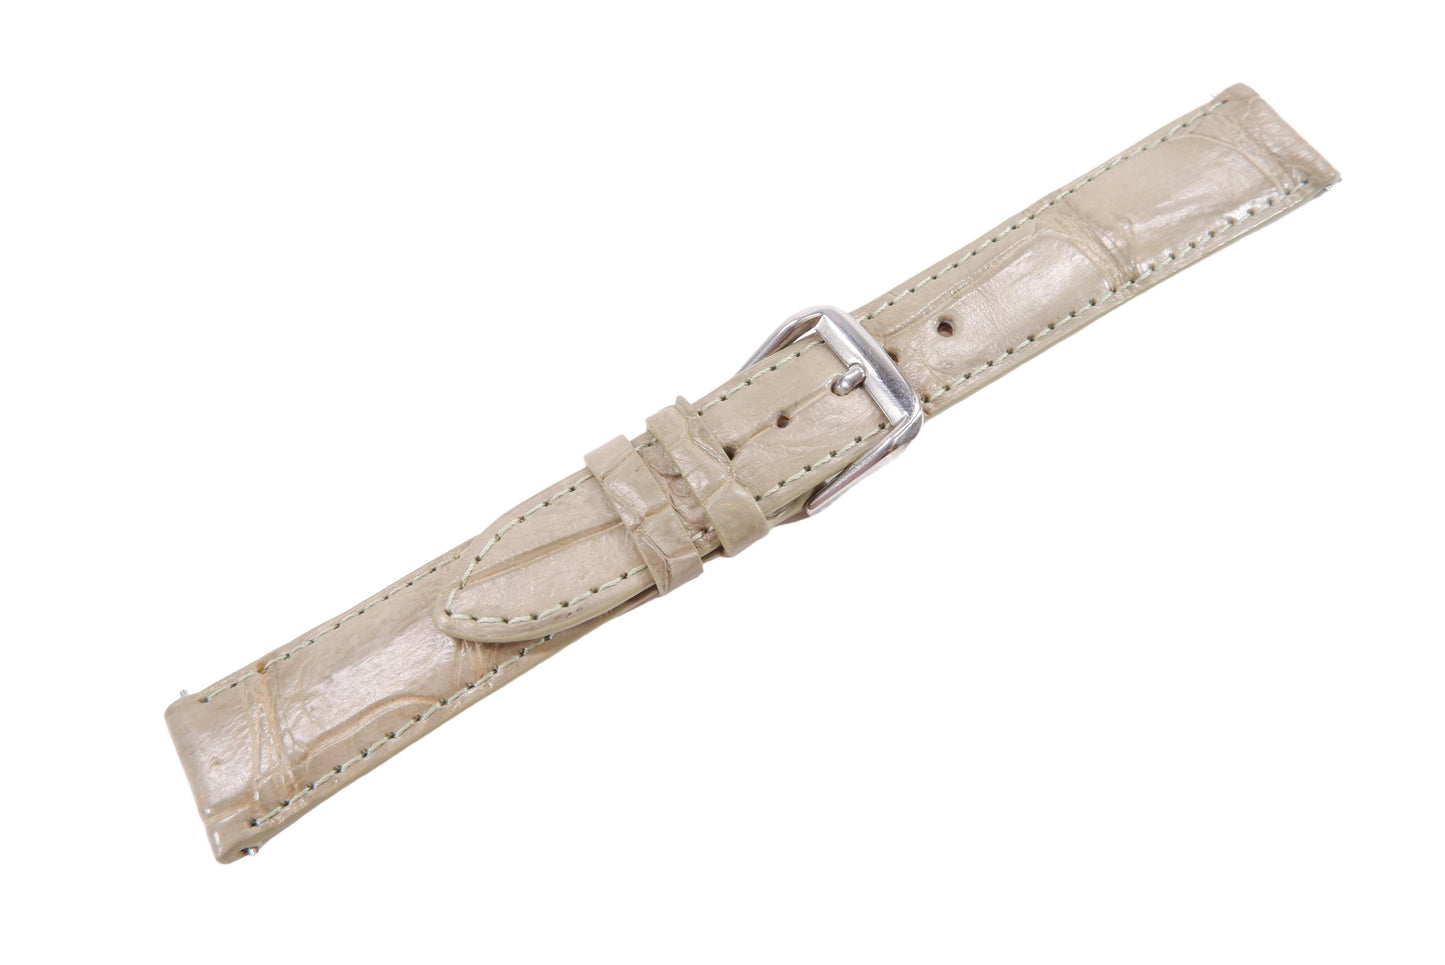 Genuine Crocodile Belly Skin Leather Quick Release Watch Strap Grey Band with Buckle